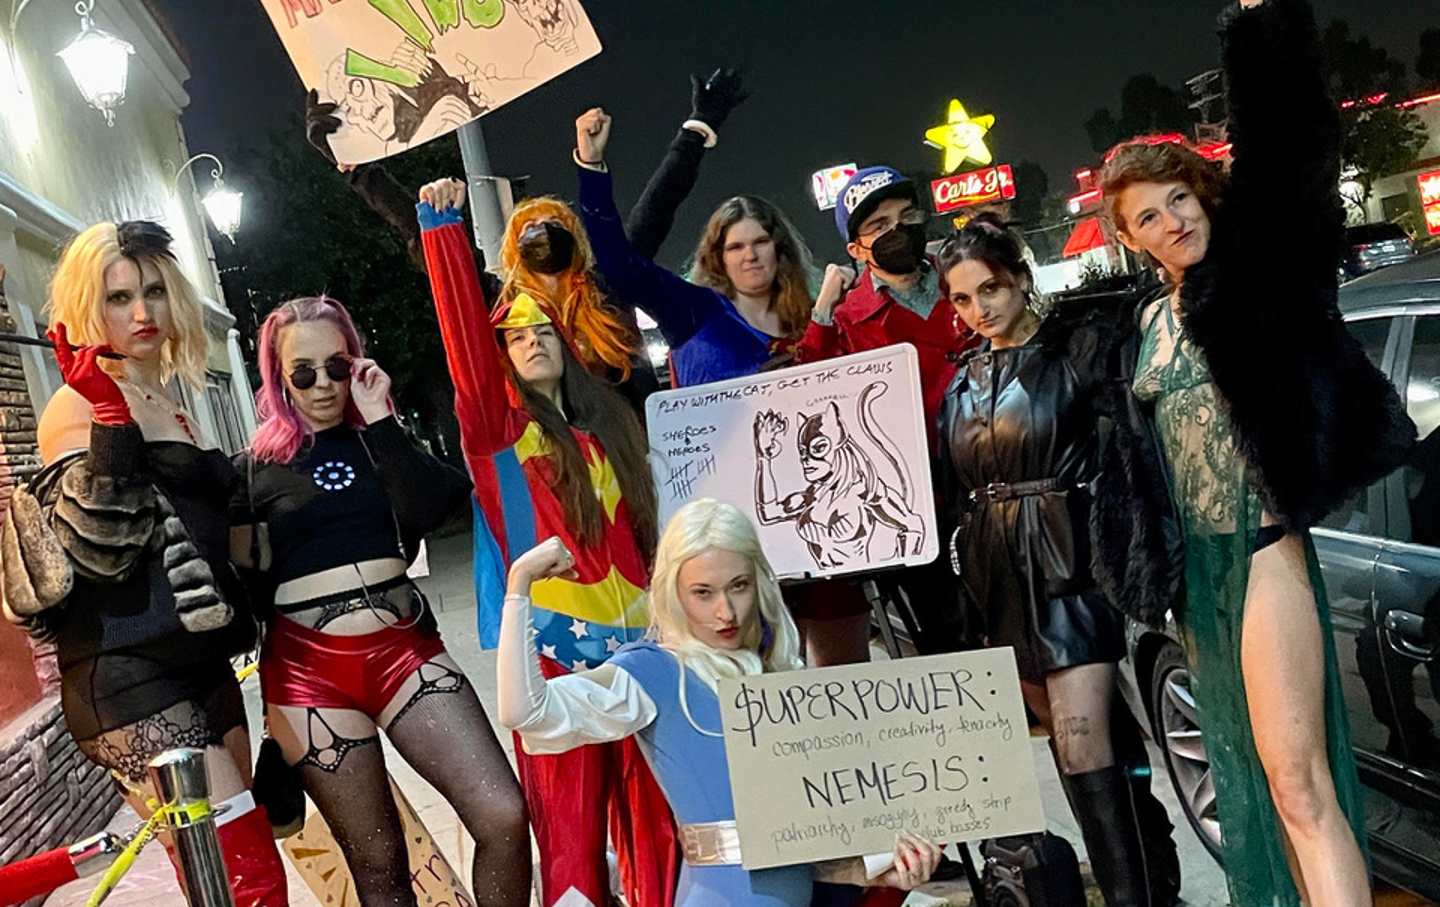 Strippers Seize the Moment, Turning a Lockout Into a Picket Line The Nation pic